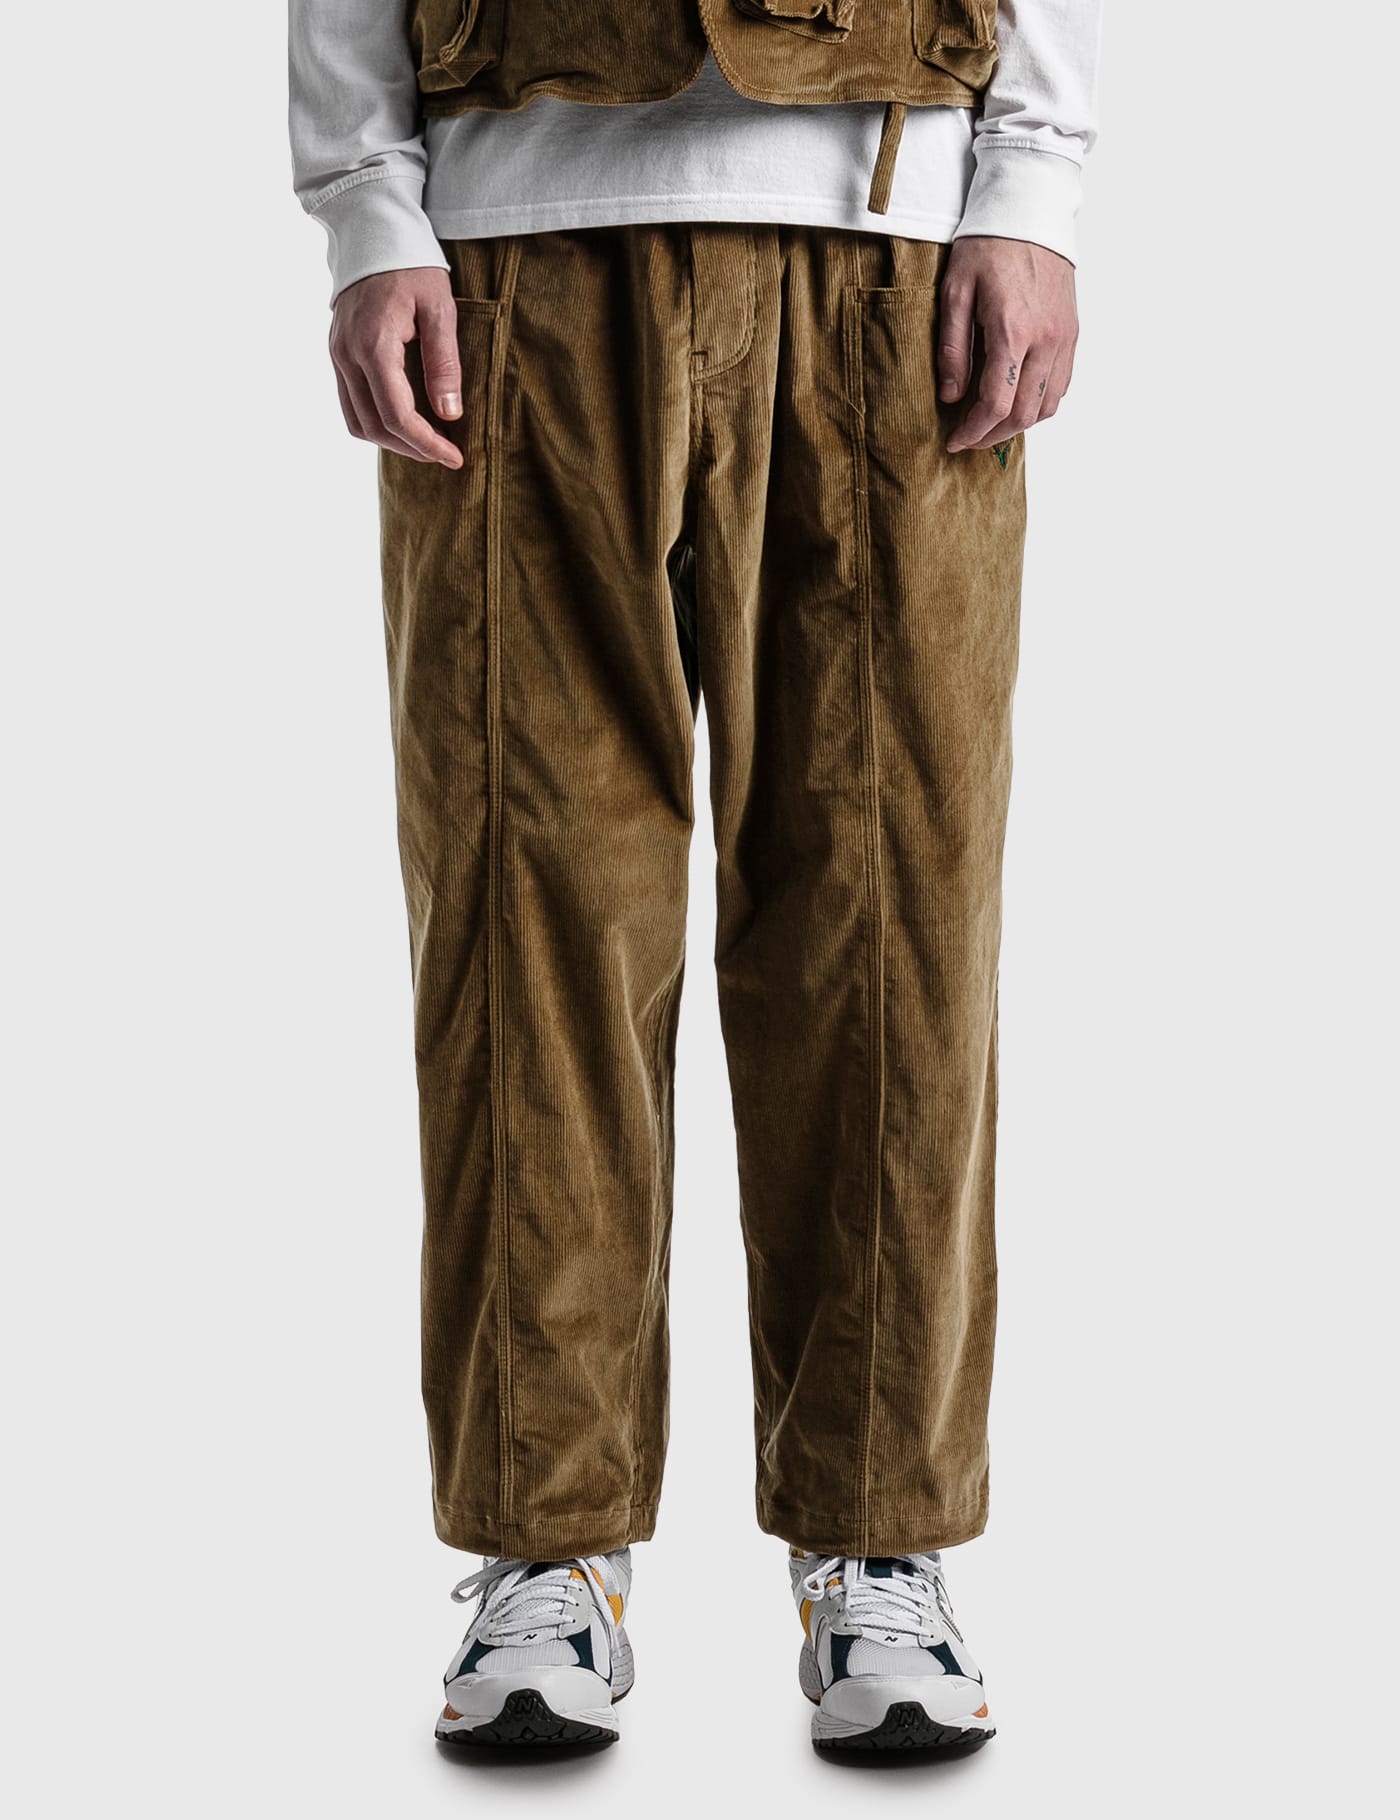 South2 West8 - Corduroy Belted C.S. Pant | HBX - Globally Curated 